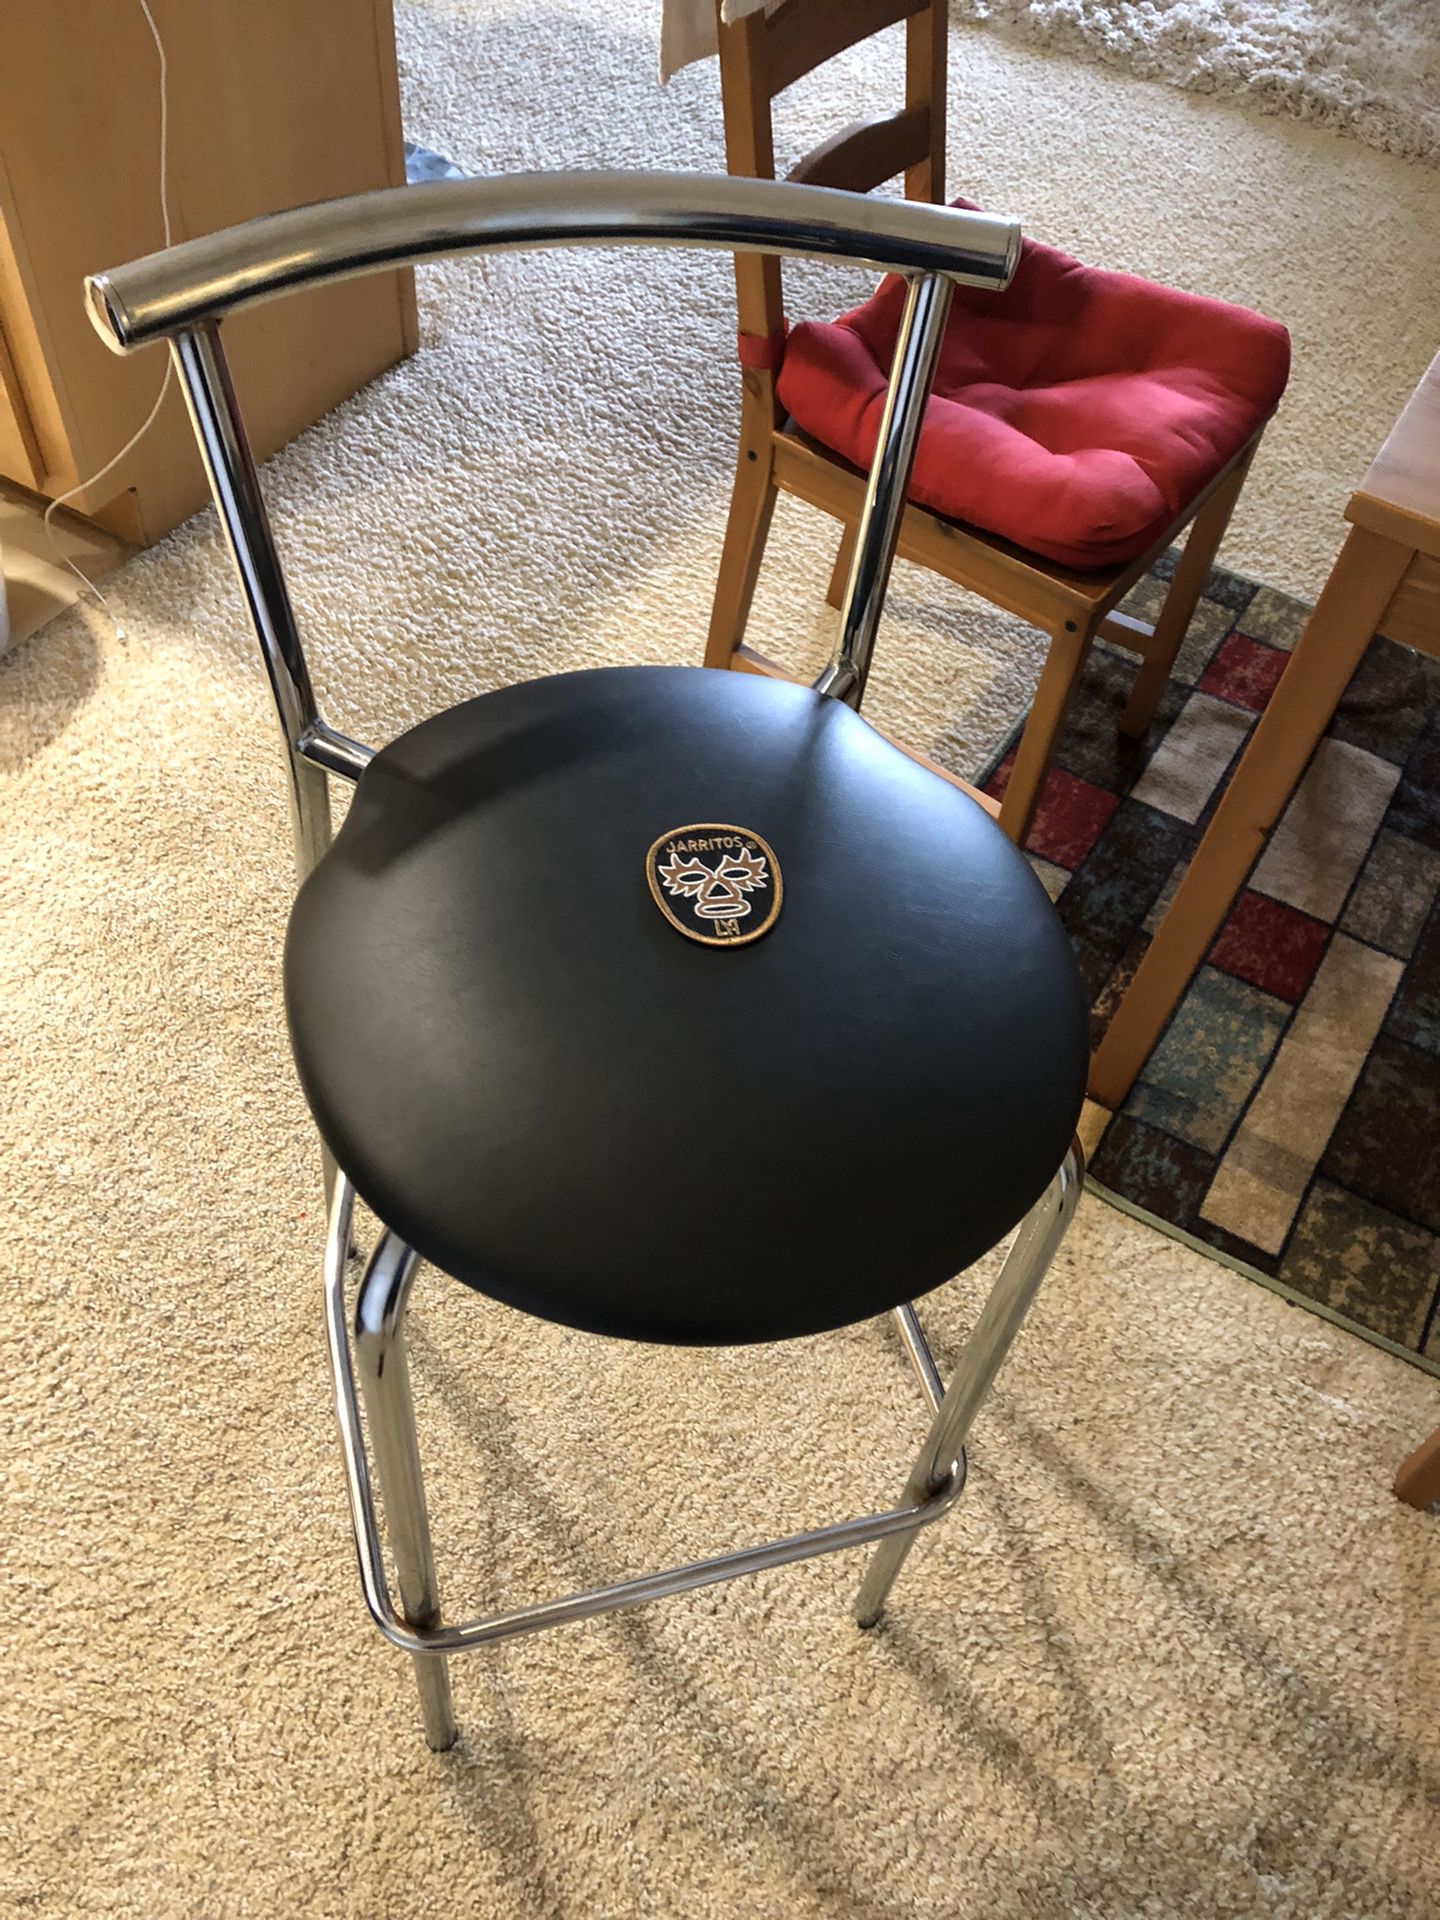 Simple Elegant Bar Stool Now for Only $25!! Free Delivery Possible near Downtown LA!